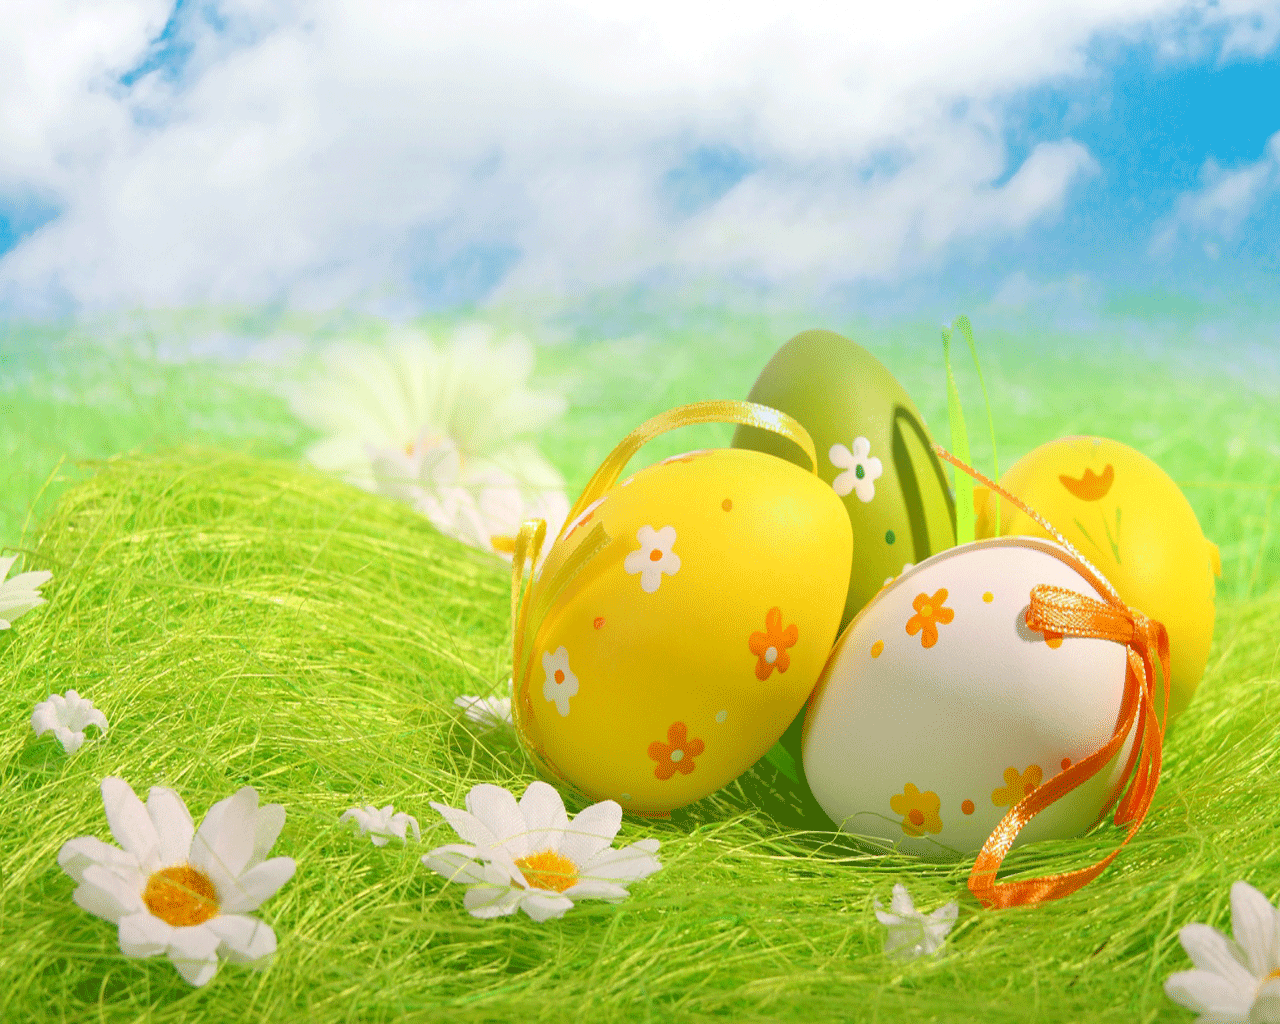 Easter Eggs Gallery Yopriceville High Quality Image And